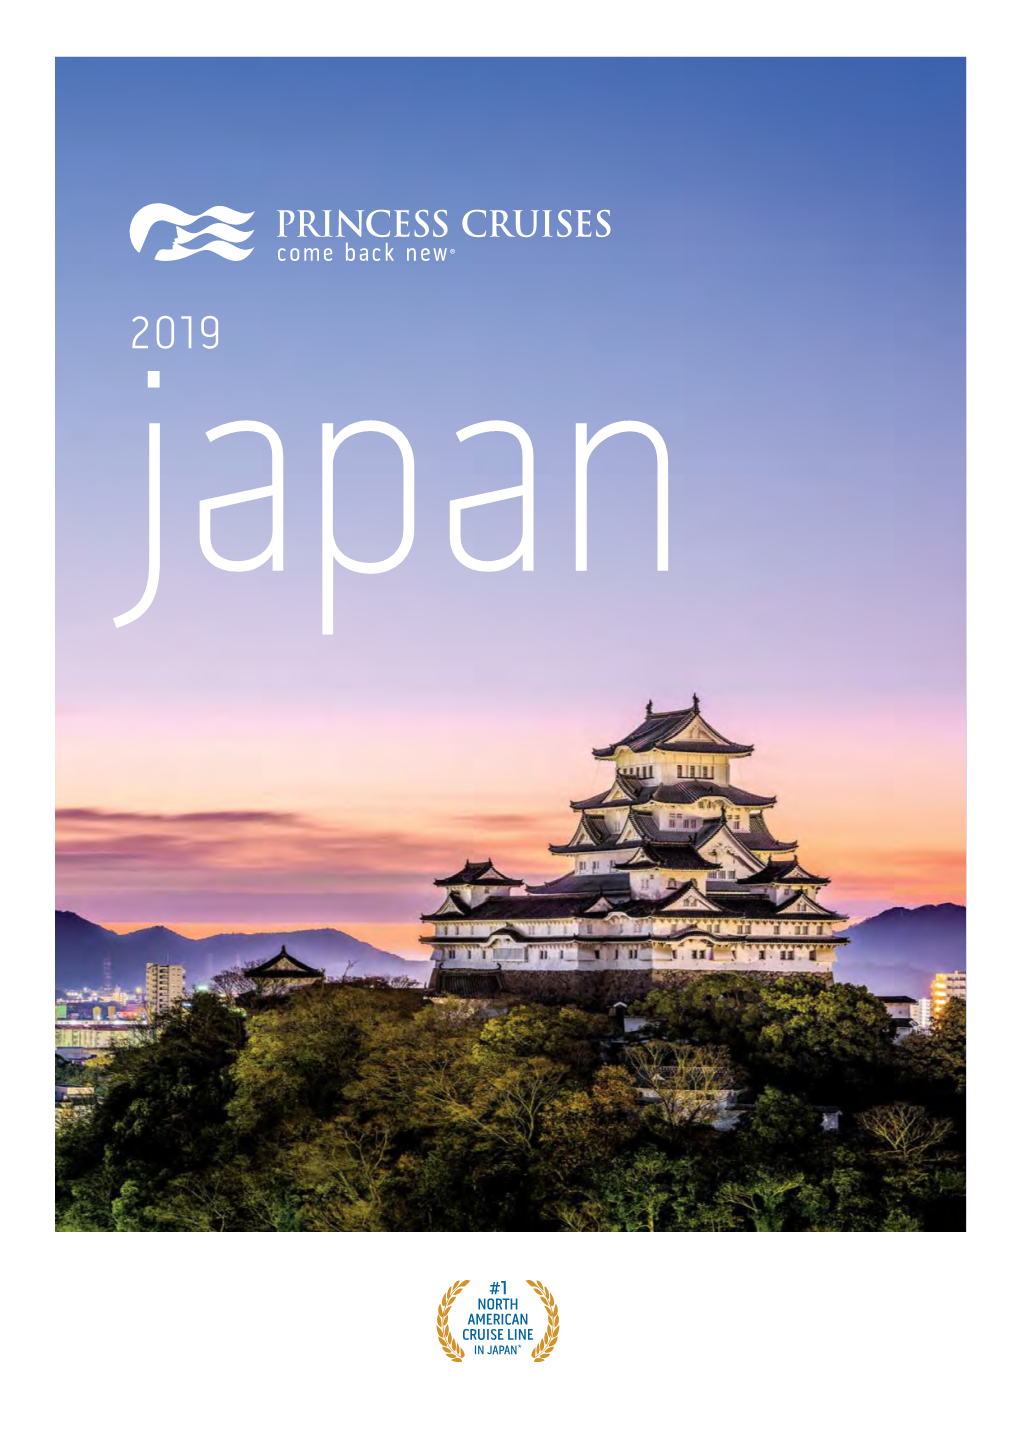 NORTH AMERICAN CRUISE LINE in JAPAN* Discover Timeless Traditions Retrace the Steps of the Mighty Shogun Warlords Through Medieval Castles